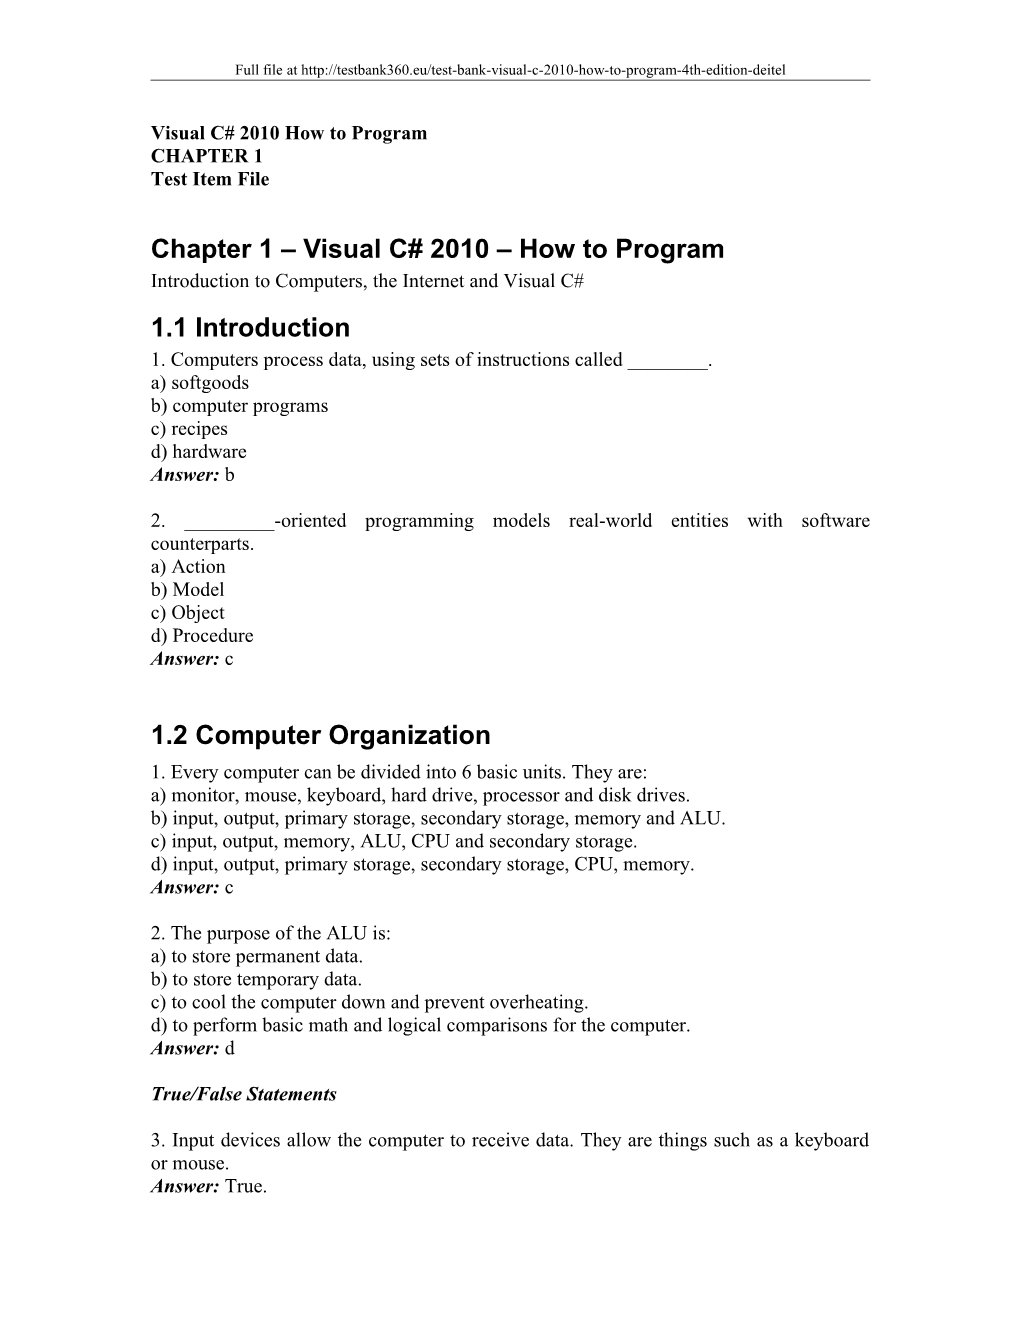 Chapter 1 Visual C# 2010 How to Program